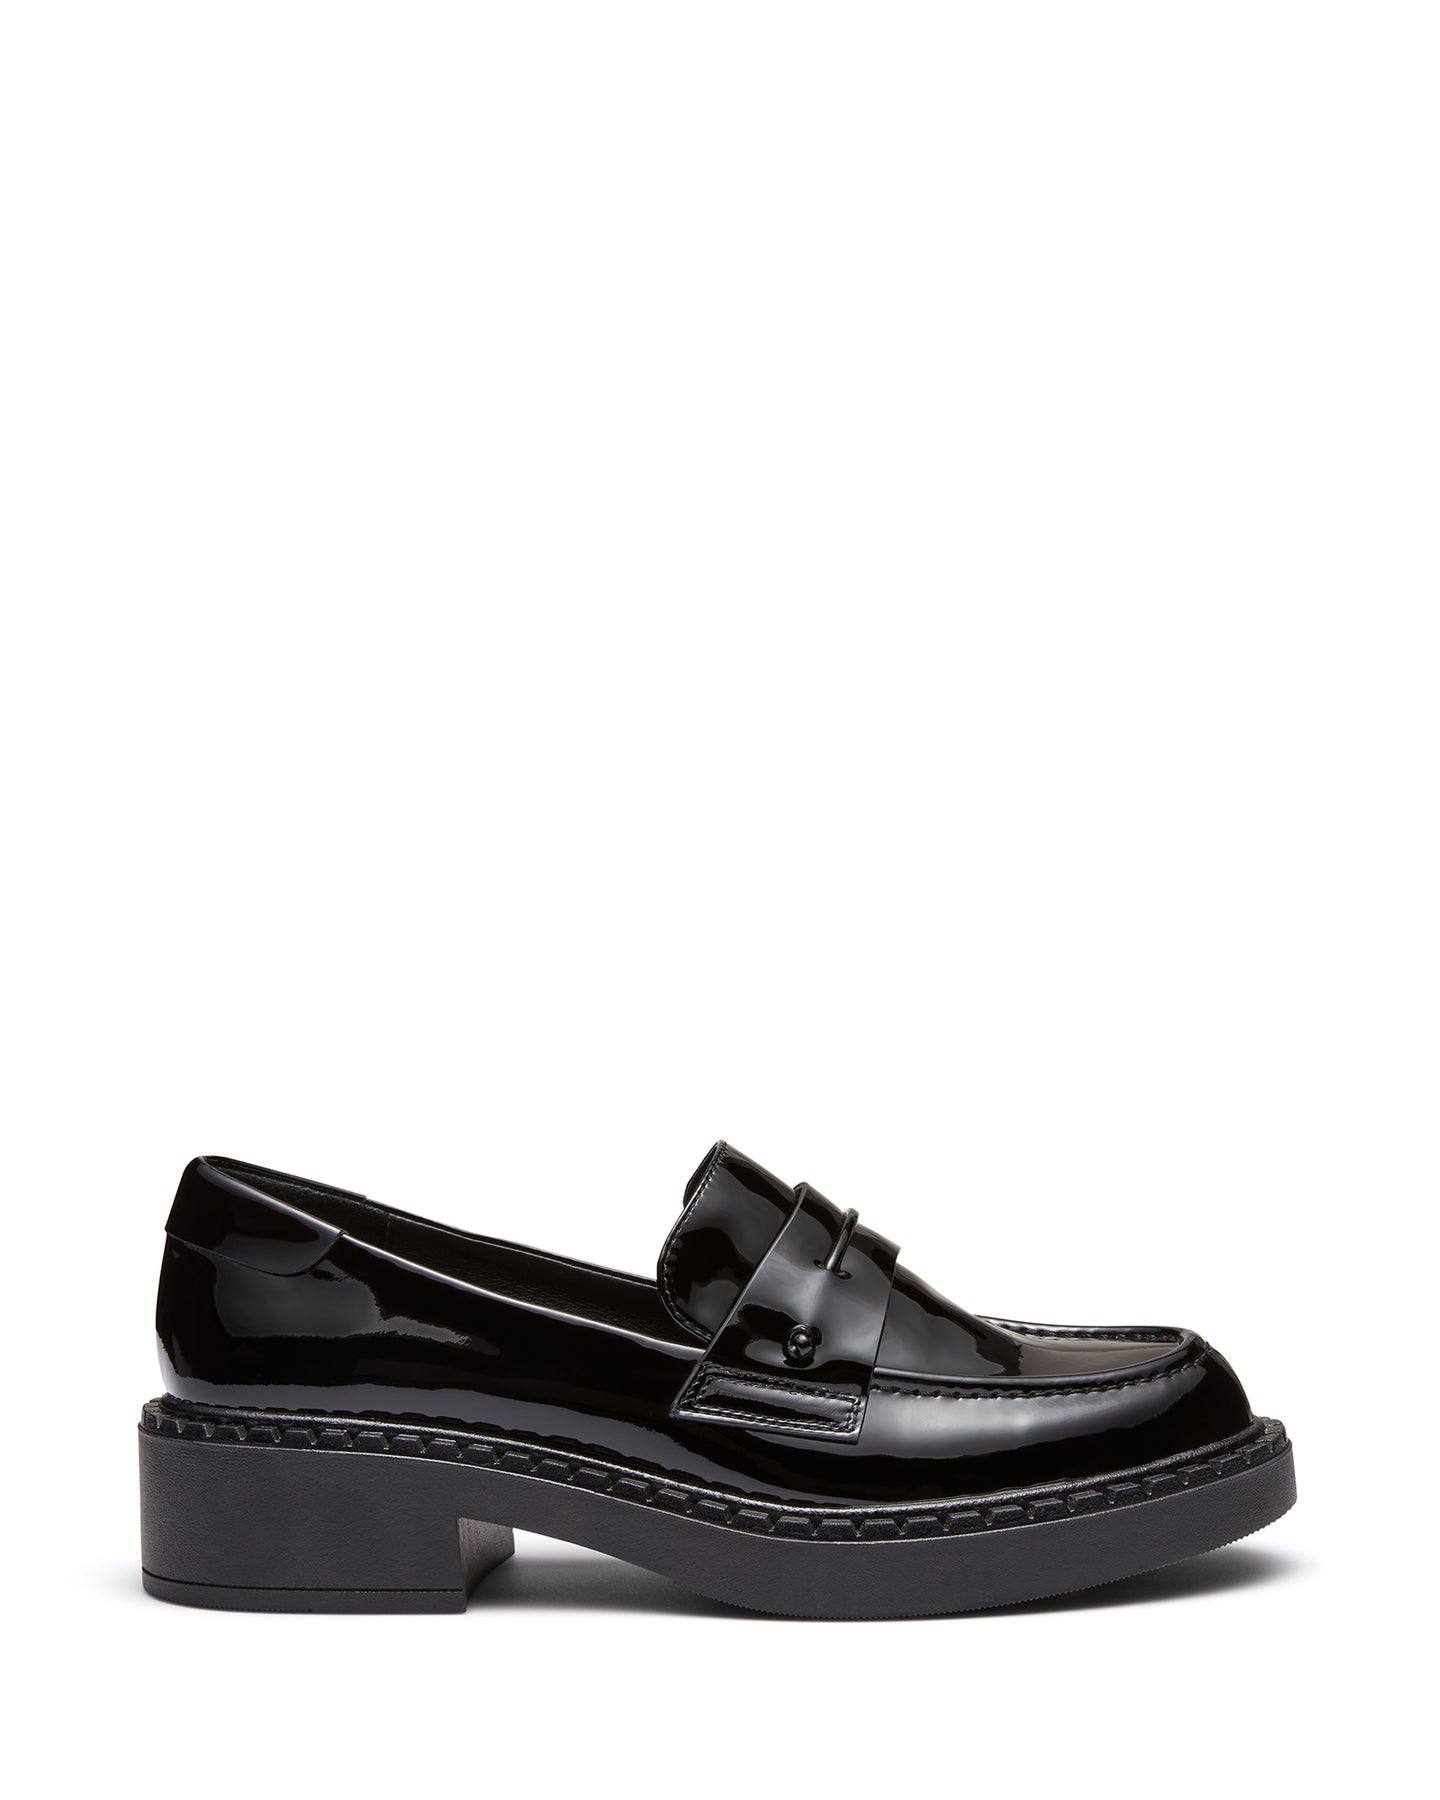 Just Because Shoes Axel Black Patent | Women's Leather Loafers | Flats | Slip On